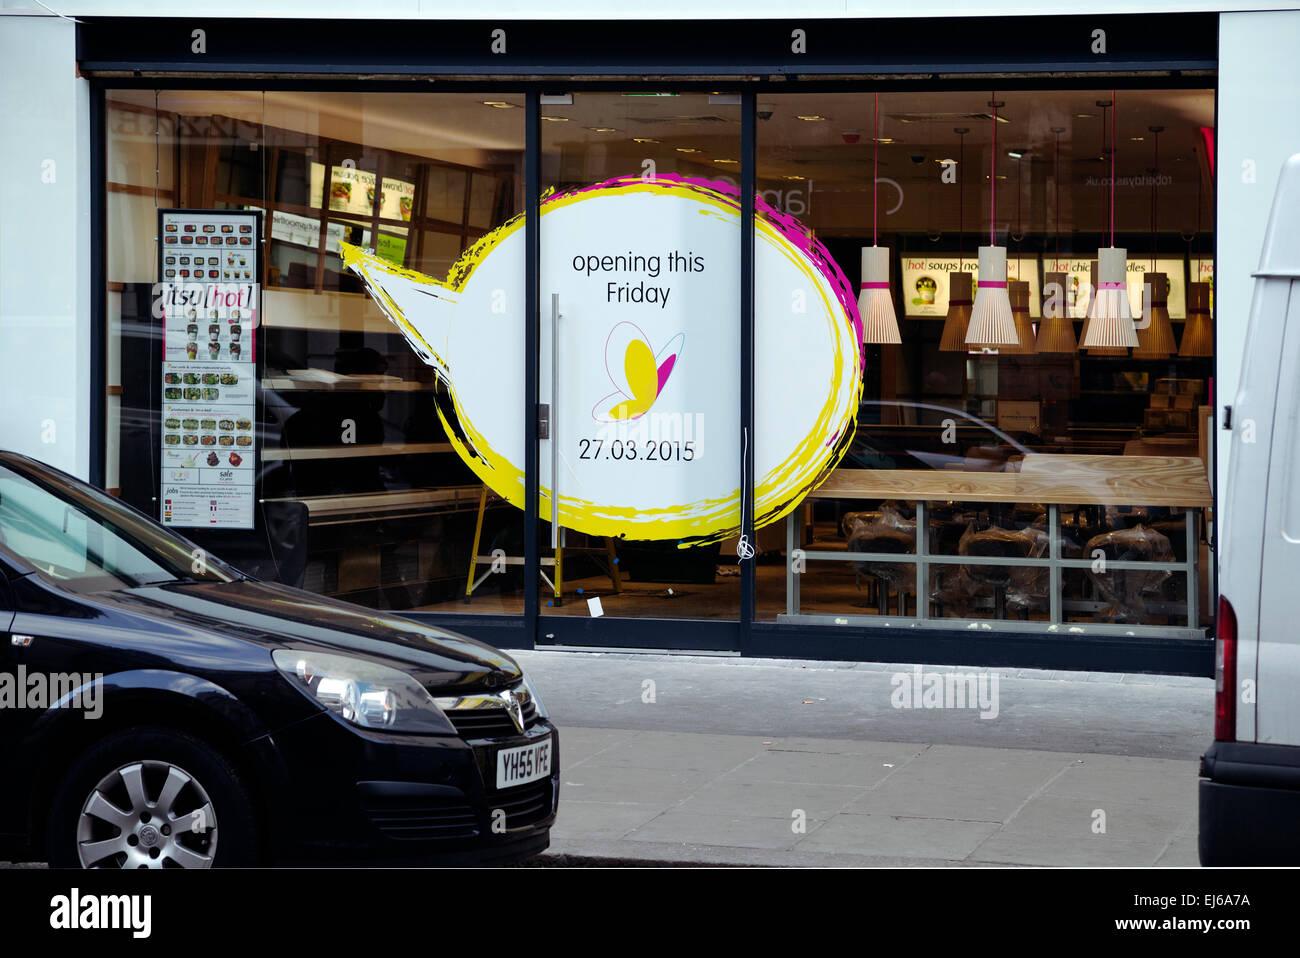 London 22nd March 2015: New Itsu shop restaurant opening soon (27th March) in Baker Street; London; England; UK Stock Photo